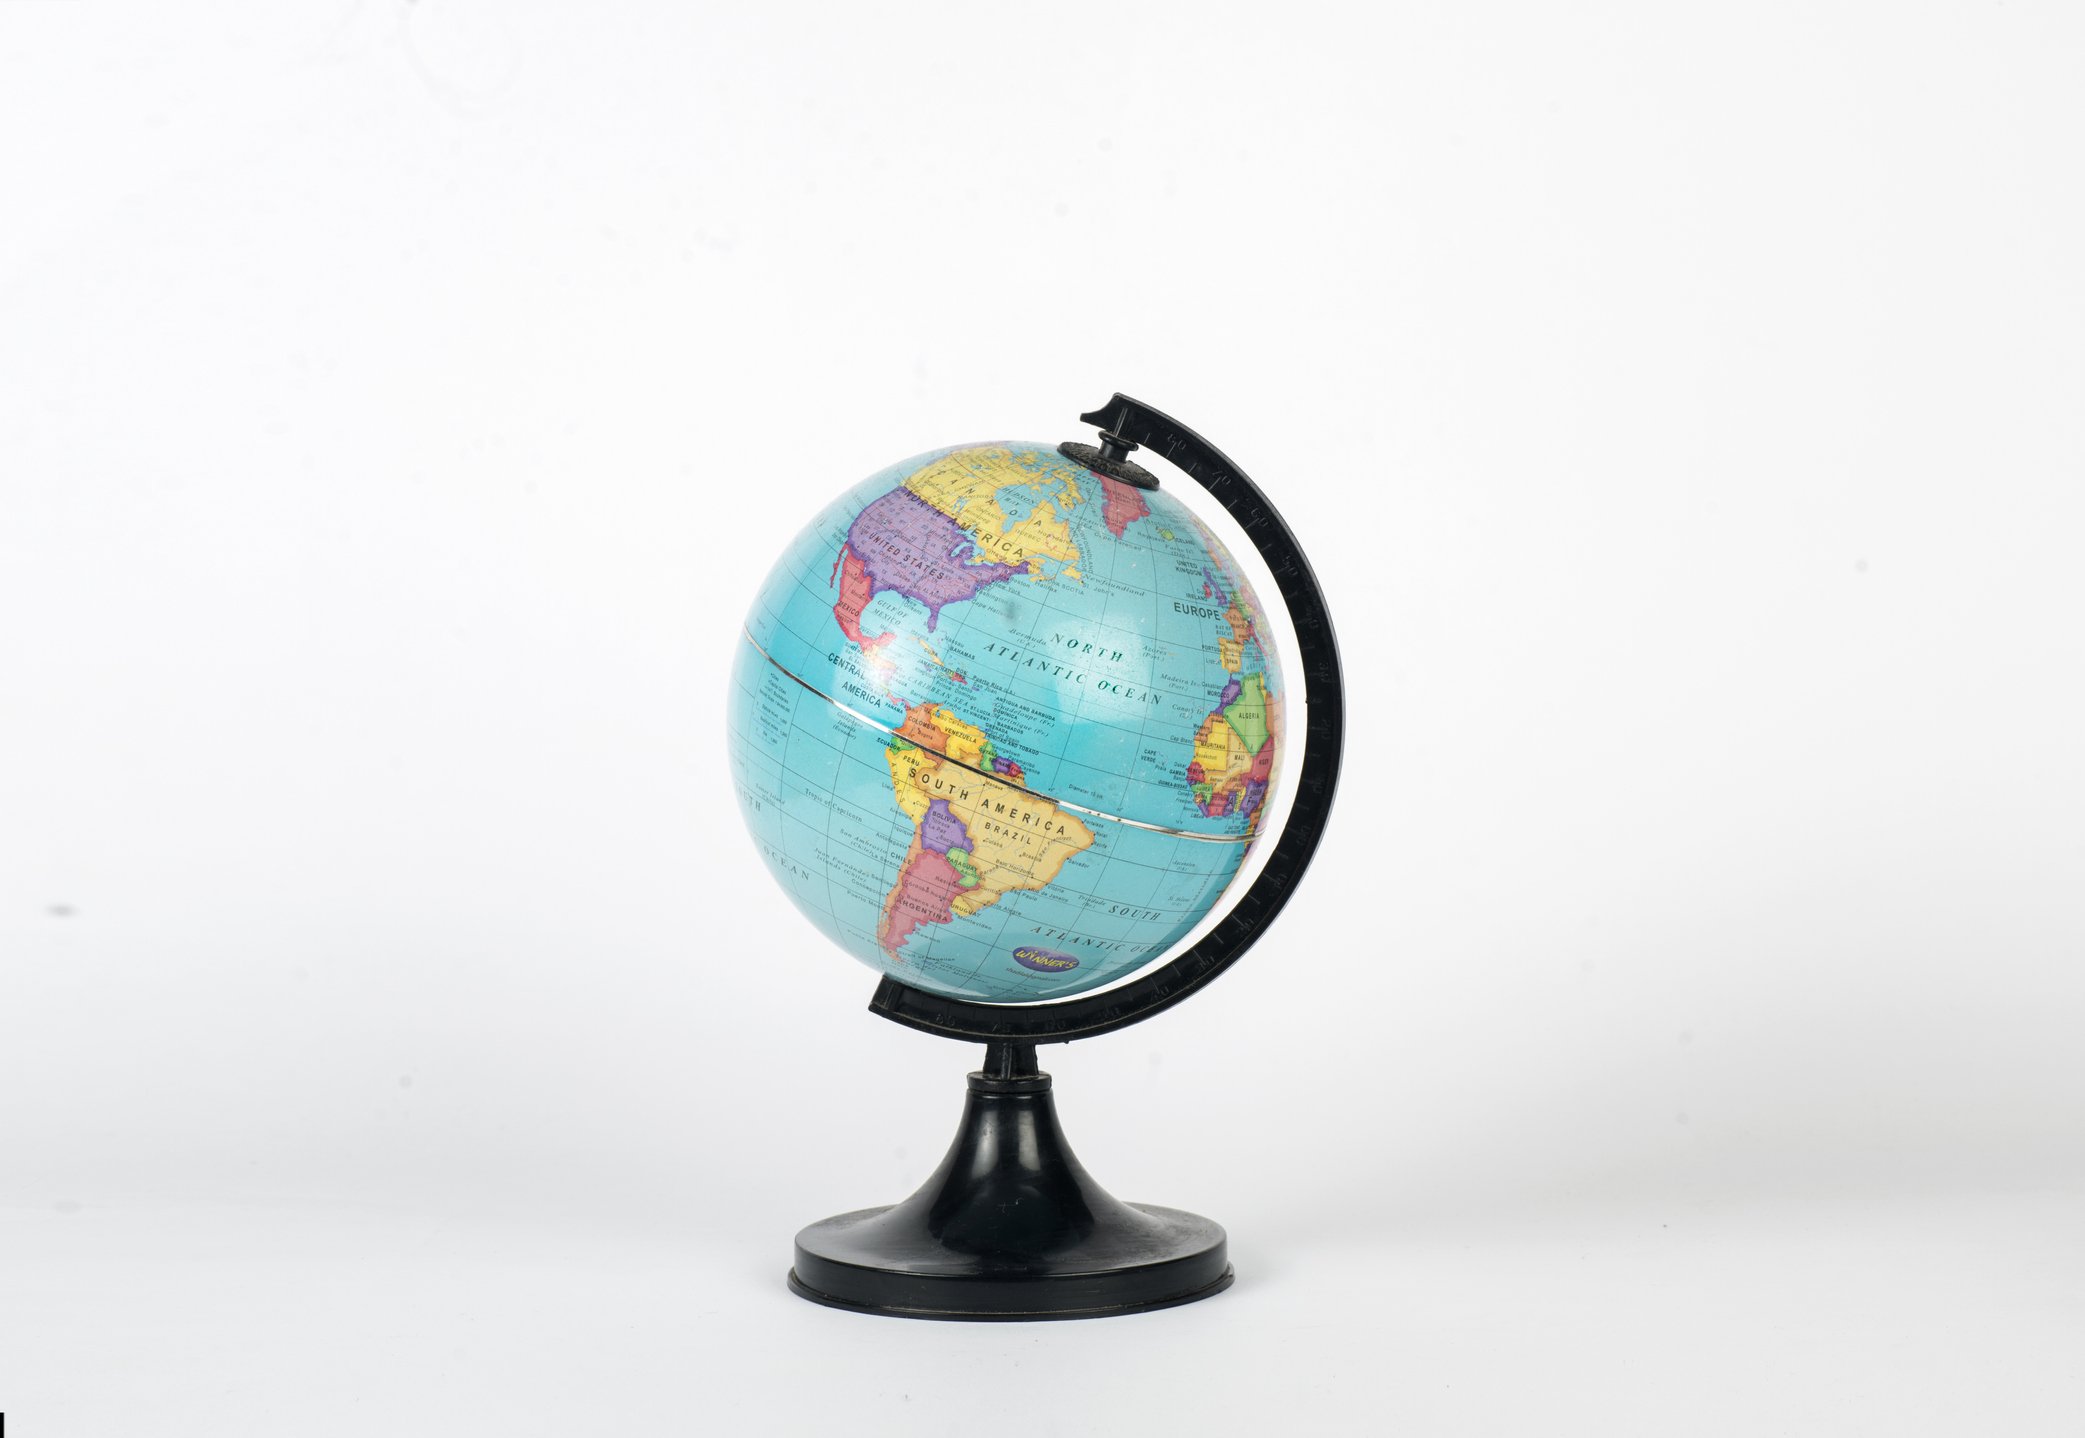 A globe of the world | Photo: Getty Images